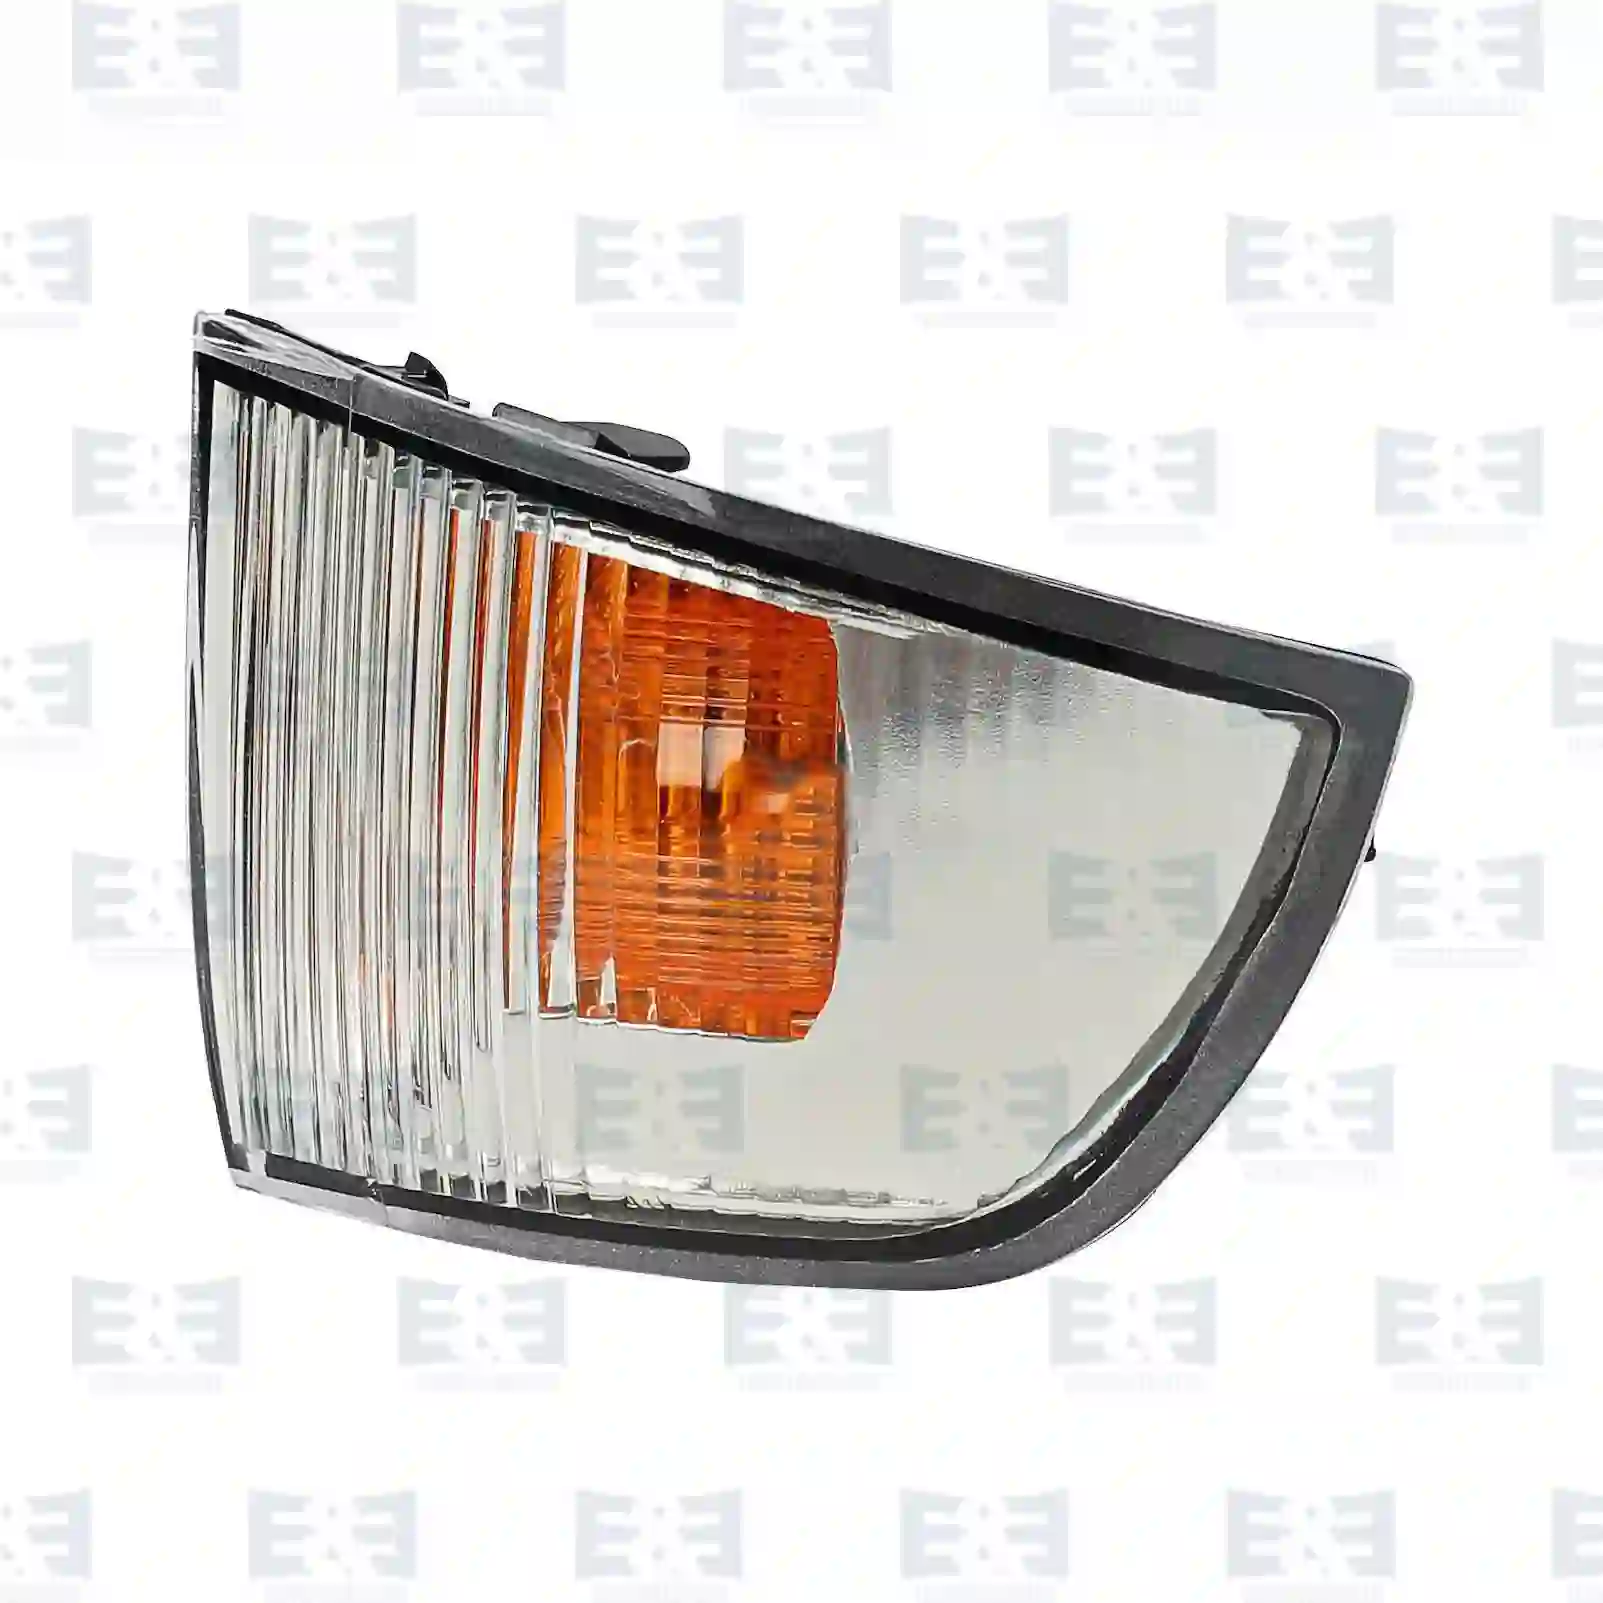 Turn signal lamp, right, without lamp carrier, 2E2298157, 03801915, 3801915, ZG21238-0008 ||  2E2298157 E&E Truck Spare Parts | Truck Spare Parts, Auotomotive Spare Parts Turn signal lamp, right, without lamp carrier, 2E2298157, 03801915, 3801915, ZG21238-0008 ||  2E2298157 E&E Truck Spare Parts | Truck Spare Parts, Auotomotive Spare Parts